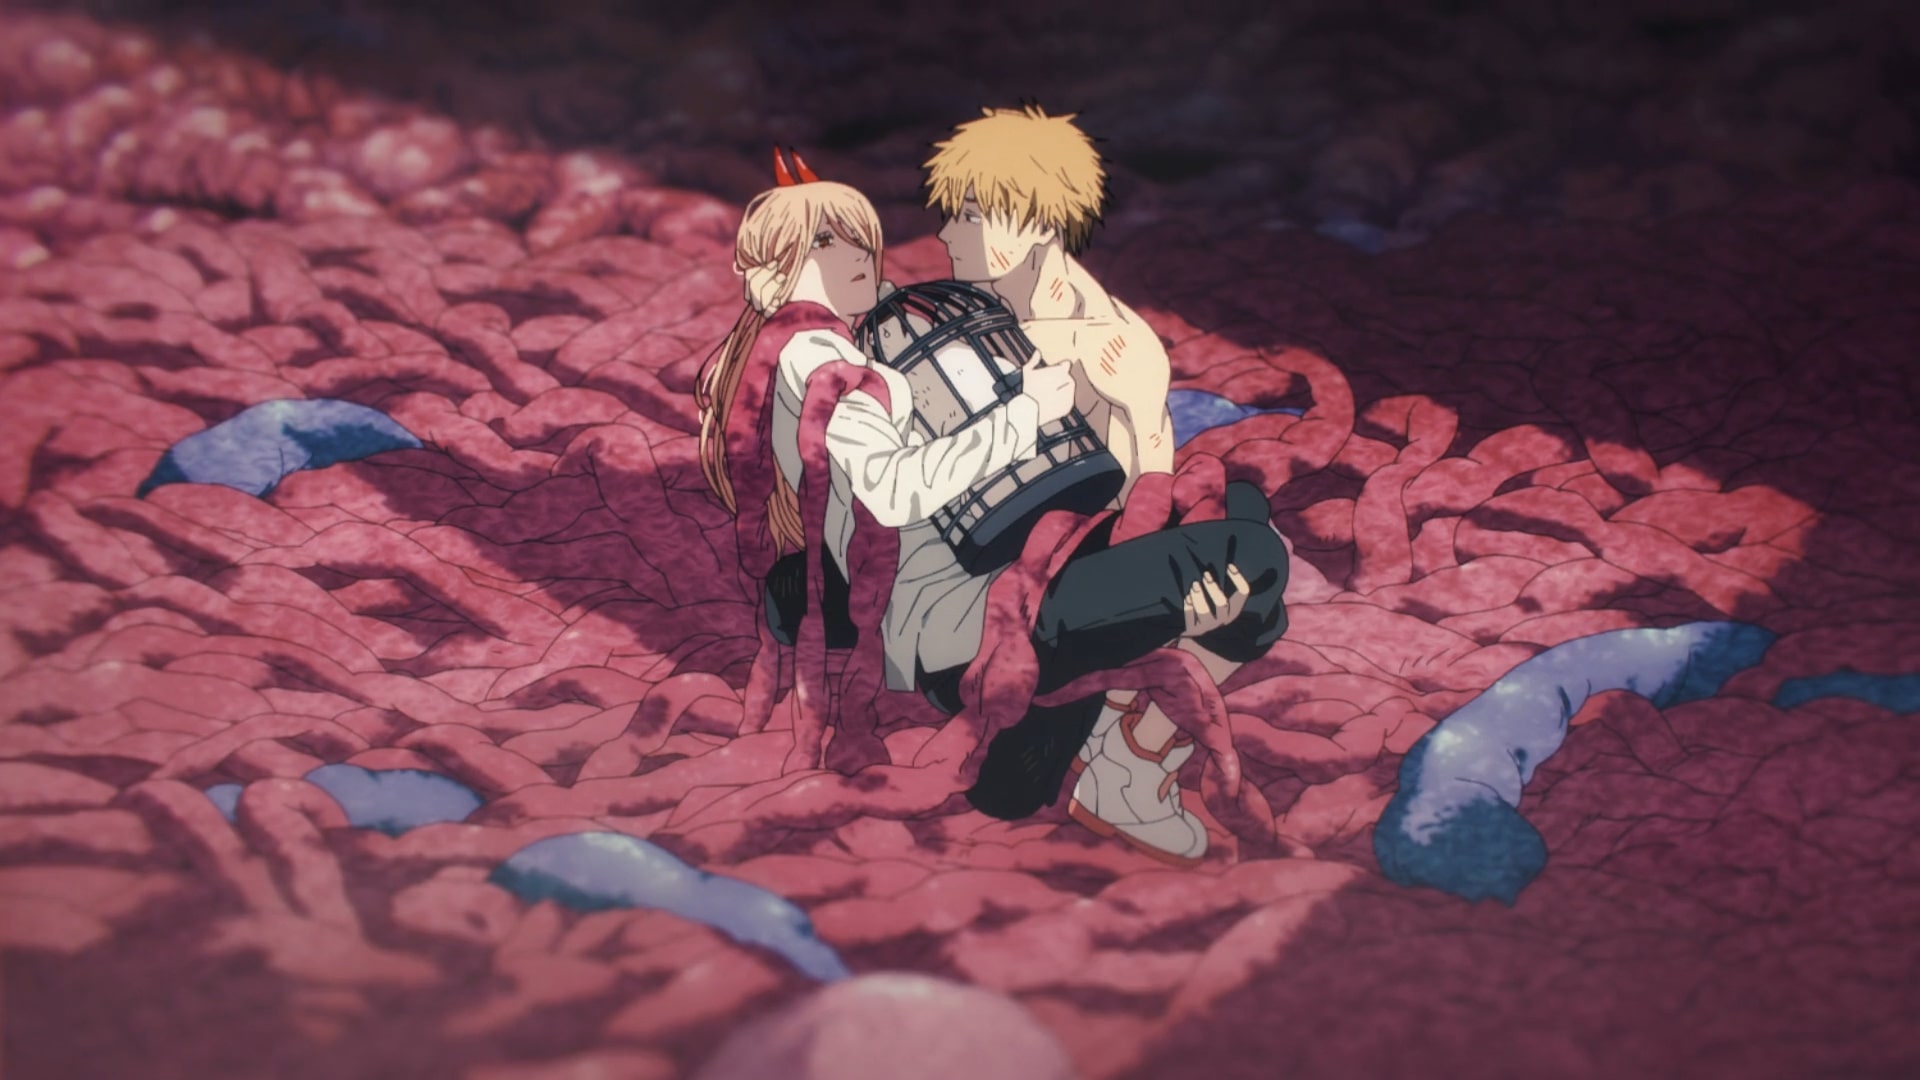 Chainsaw Man Episode 4 Recap and Ending, Explained - The Cinemaholic